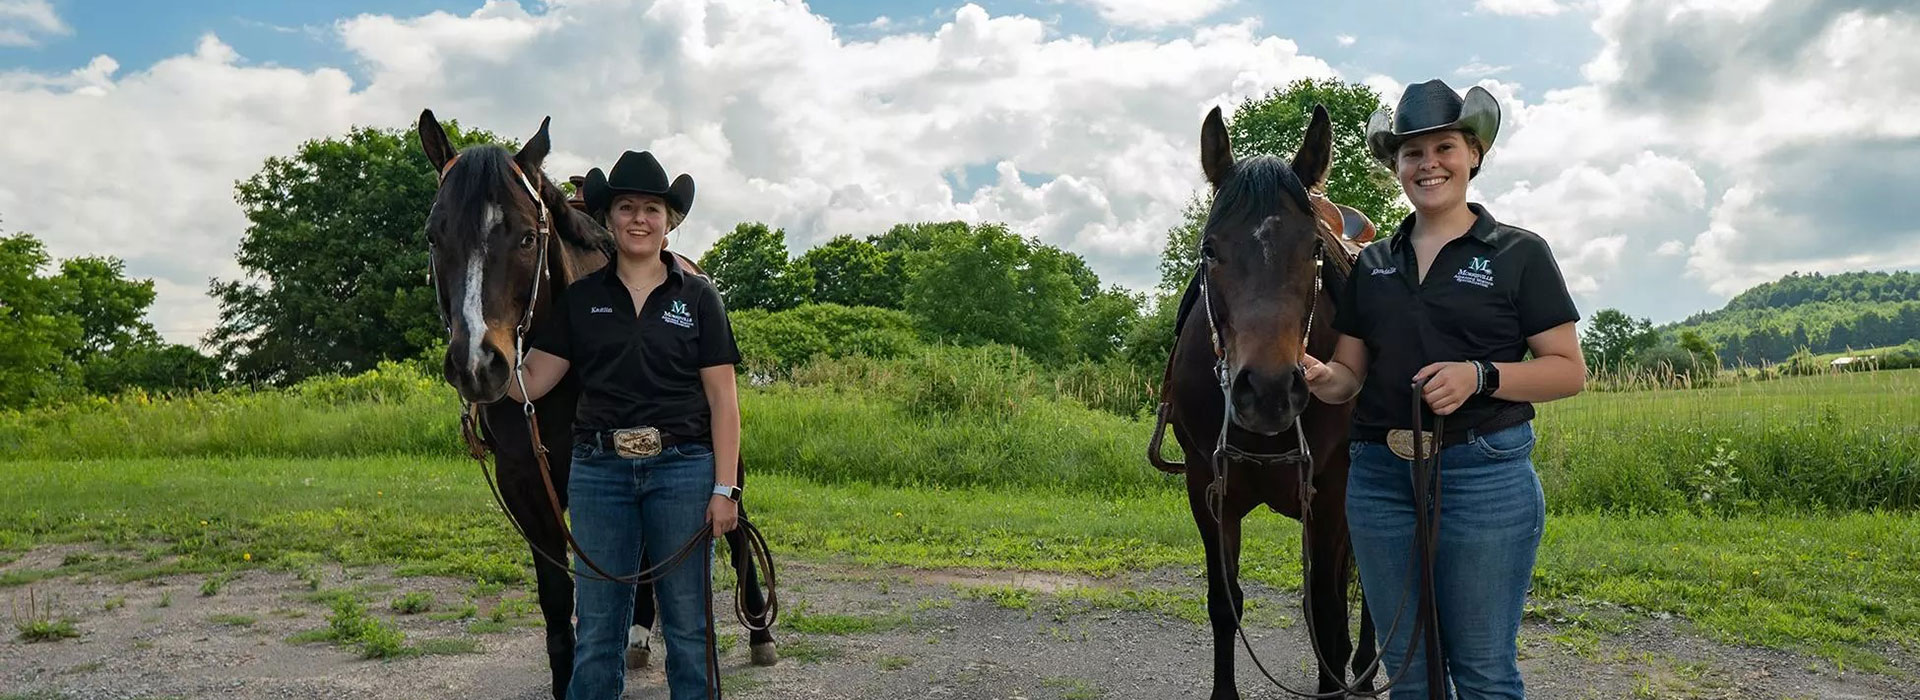 Horses who once relied on classes of students for their care, learned to rely on unheralded equine students and dedicated faculty and staff to keep them going during the COVID-19 quarantine, including Kaitlin Renschen, left, with Donald, and Kendalle Booth with Wilma.